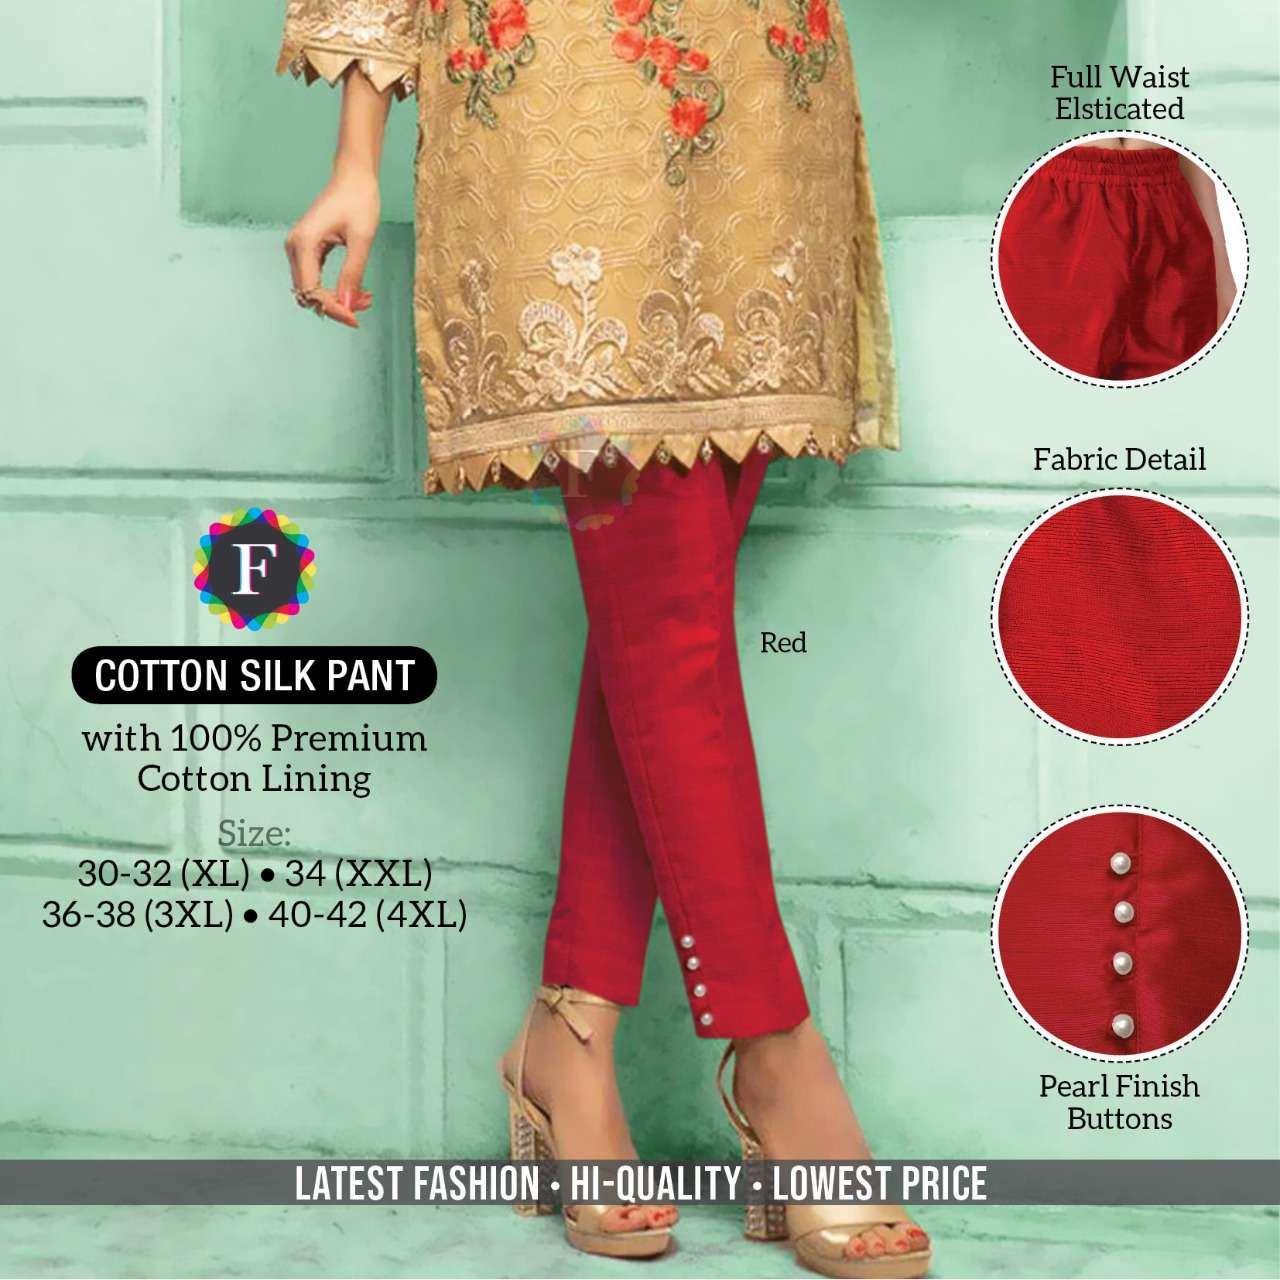 Cotton Silk Pant Bottom Wear Collection Pants Buy Online